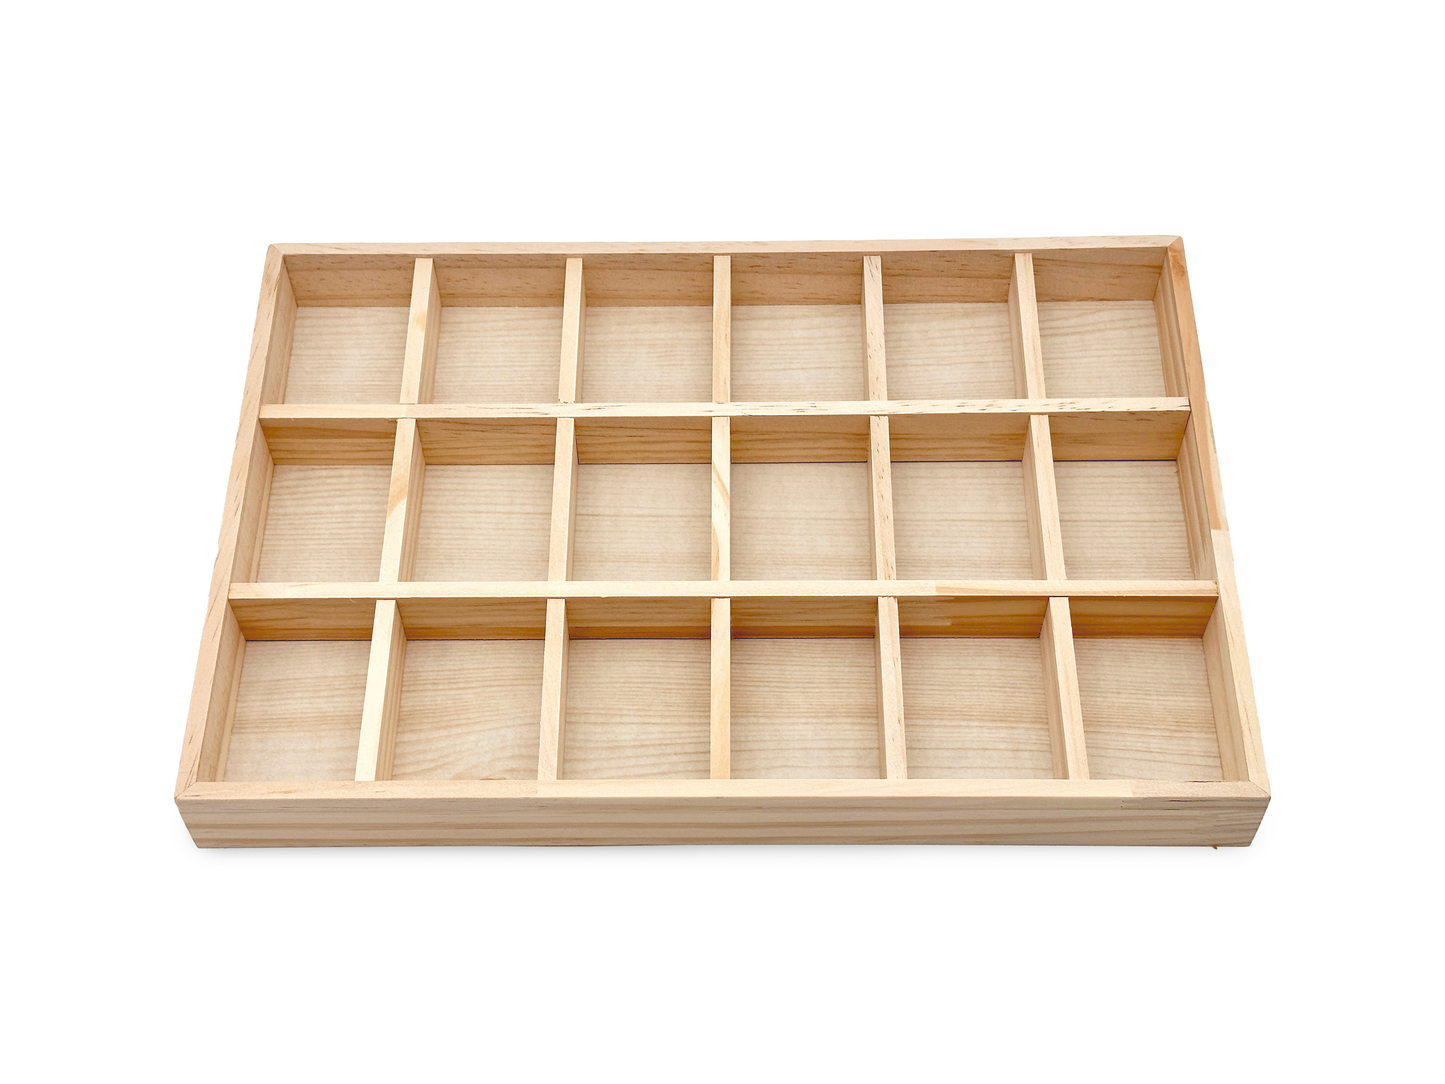 18 Compartment Natural Wood Jewelry Display Tray